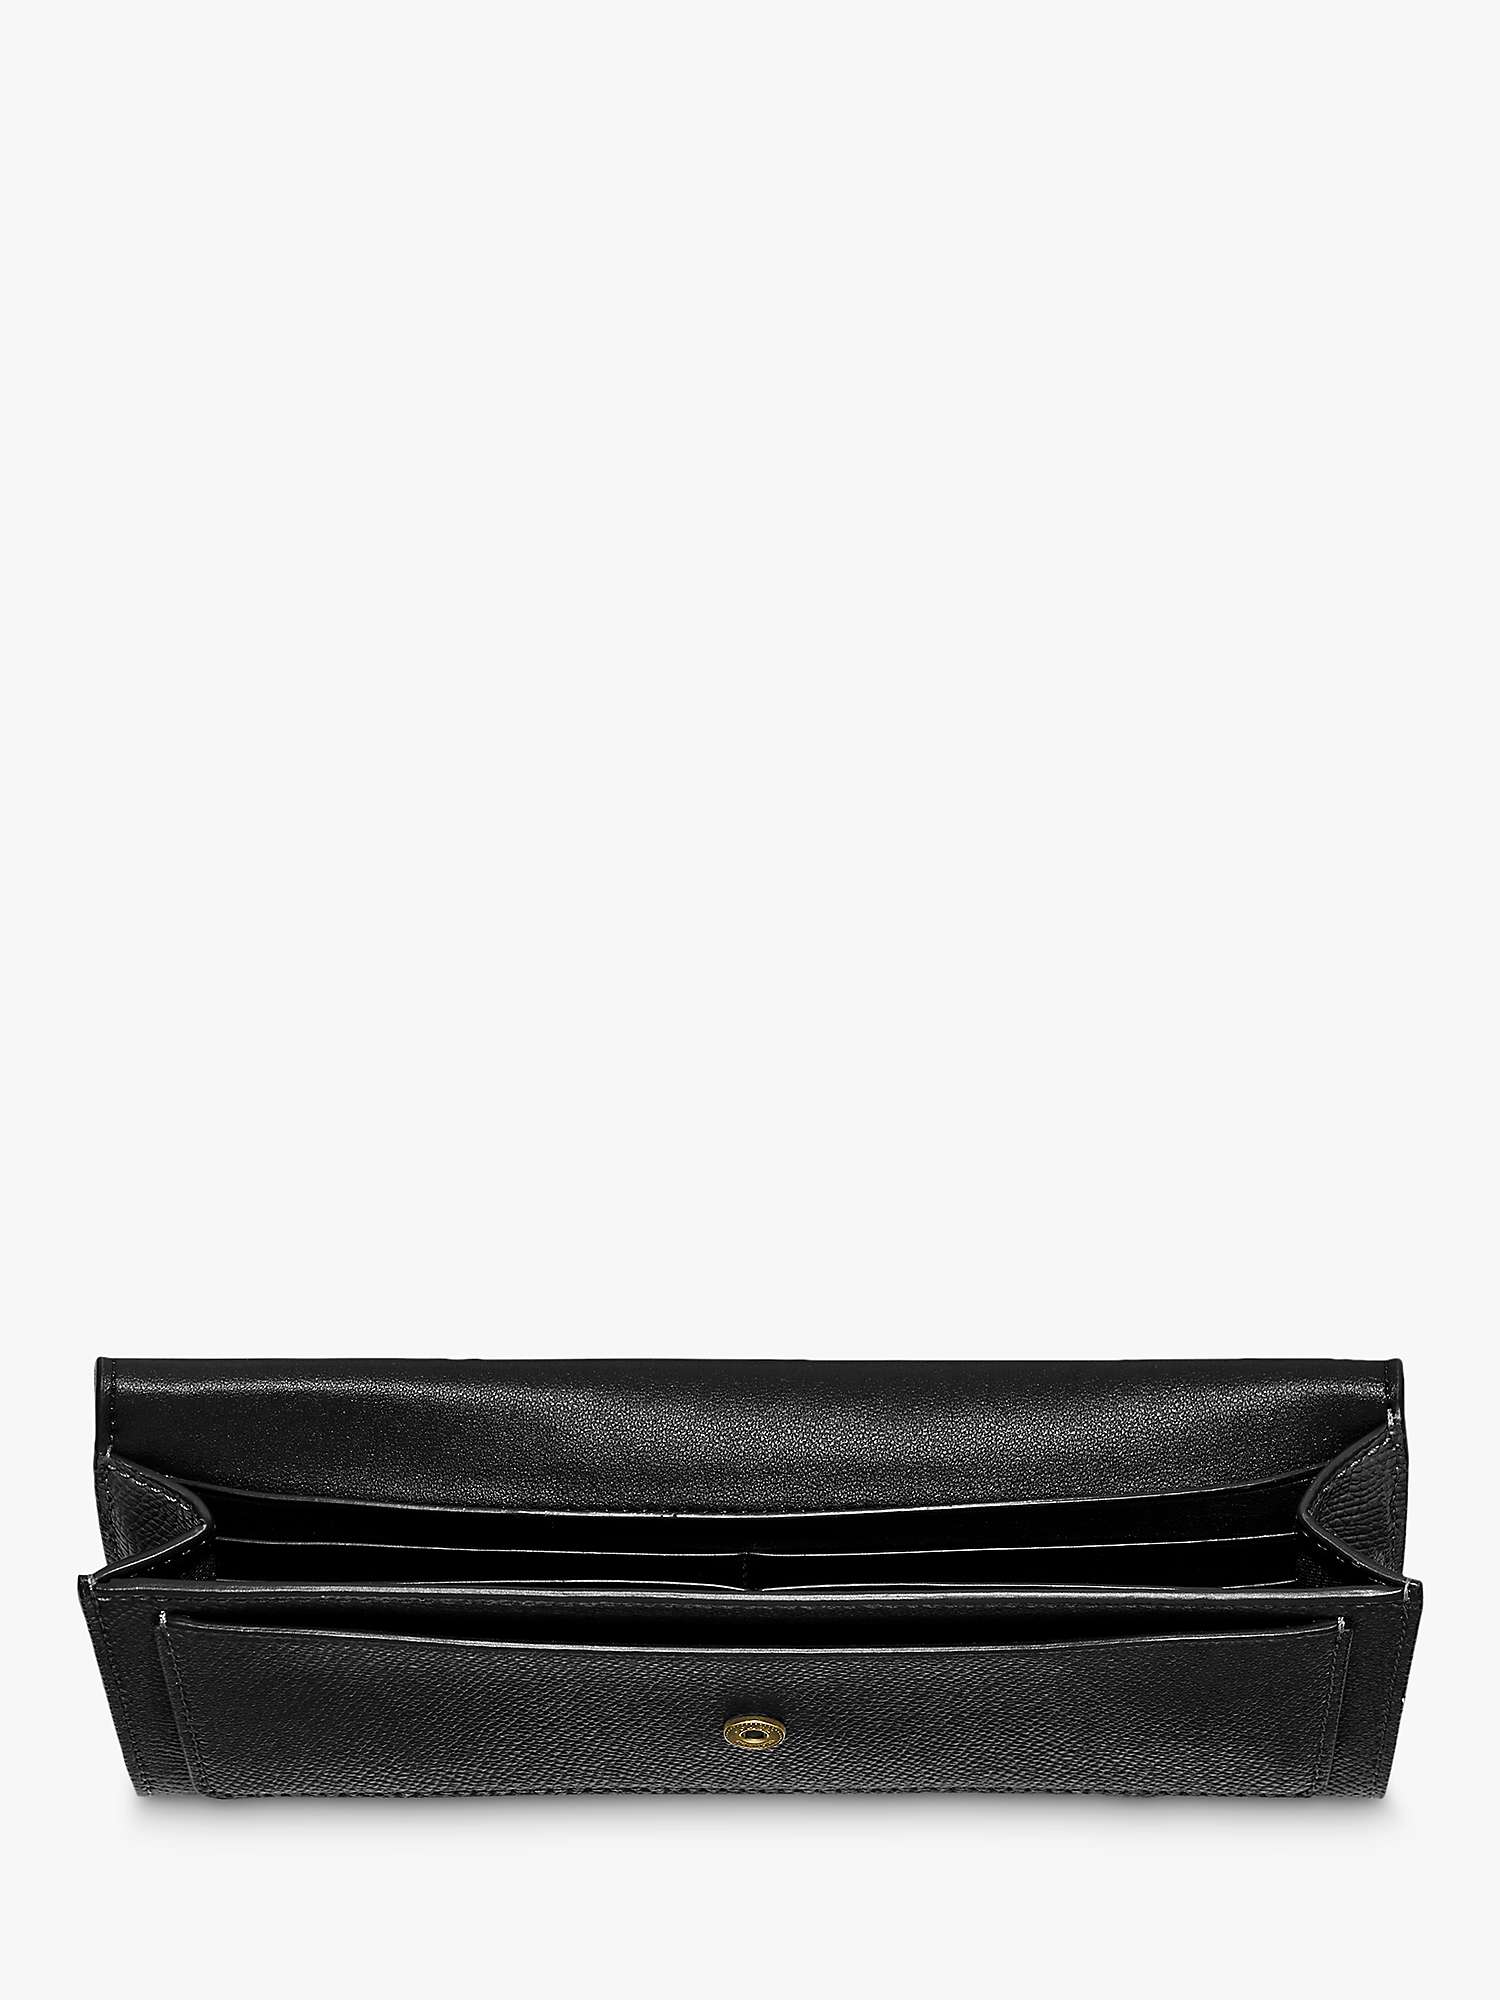 Buy Coach Wyn Leather Envelope Purse Online at johnlewis.com